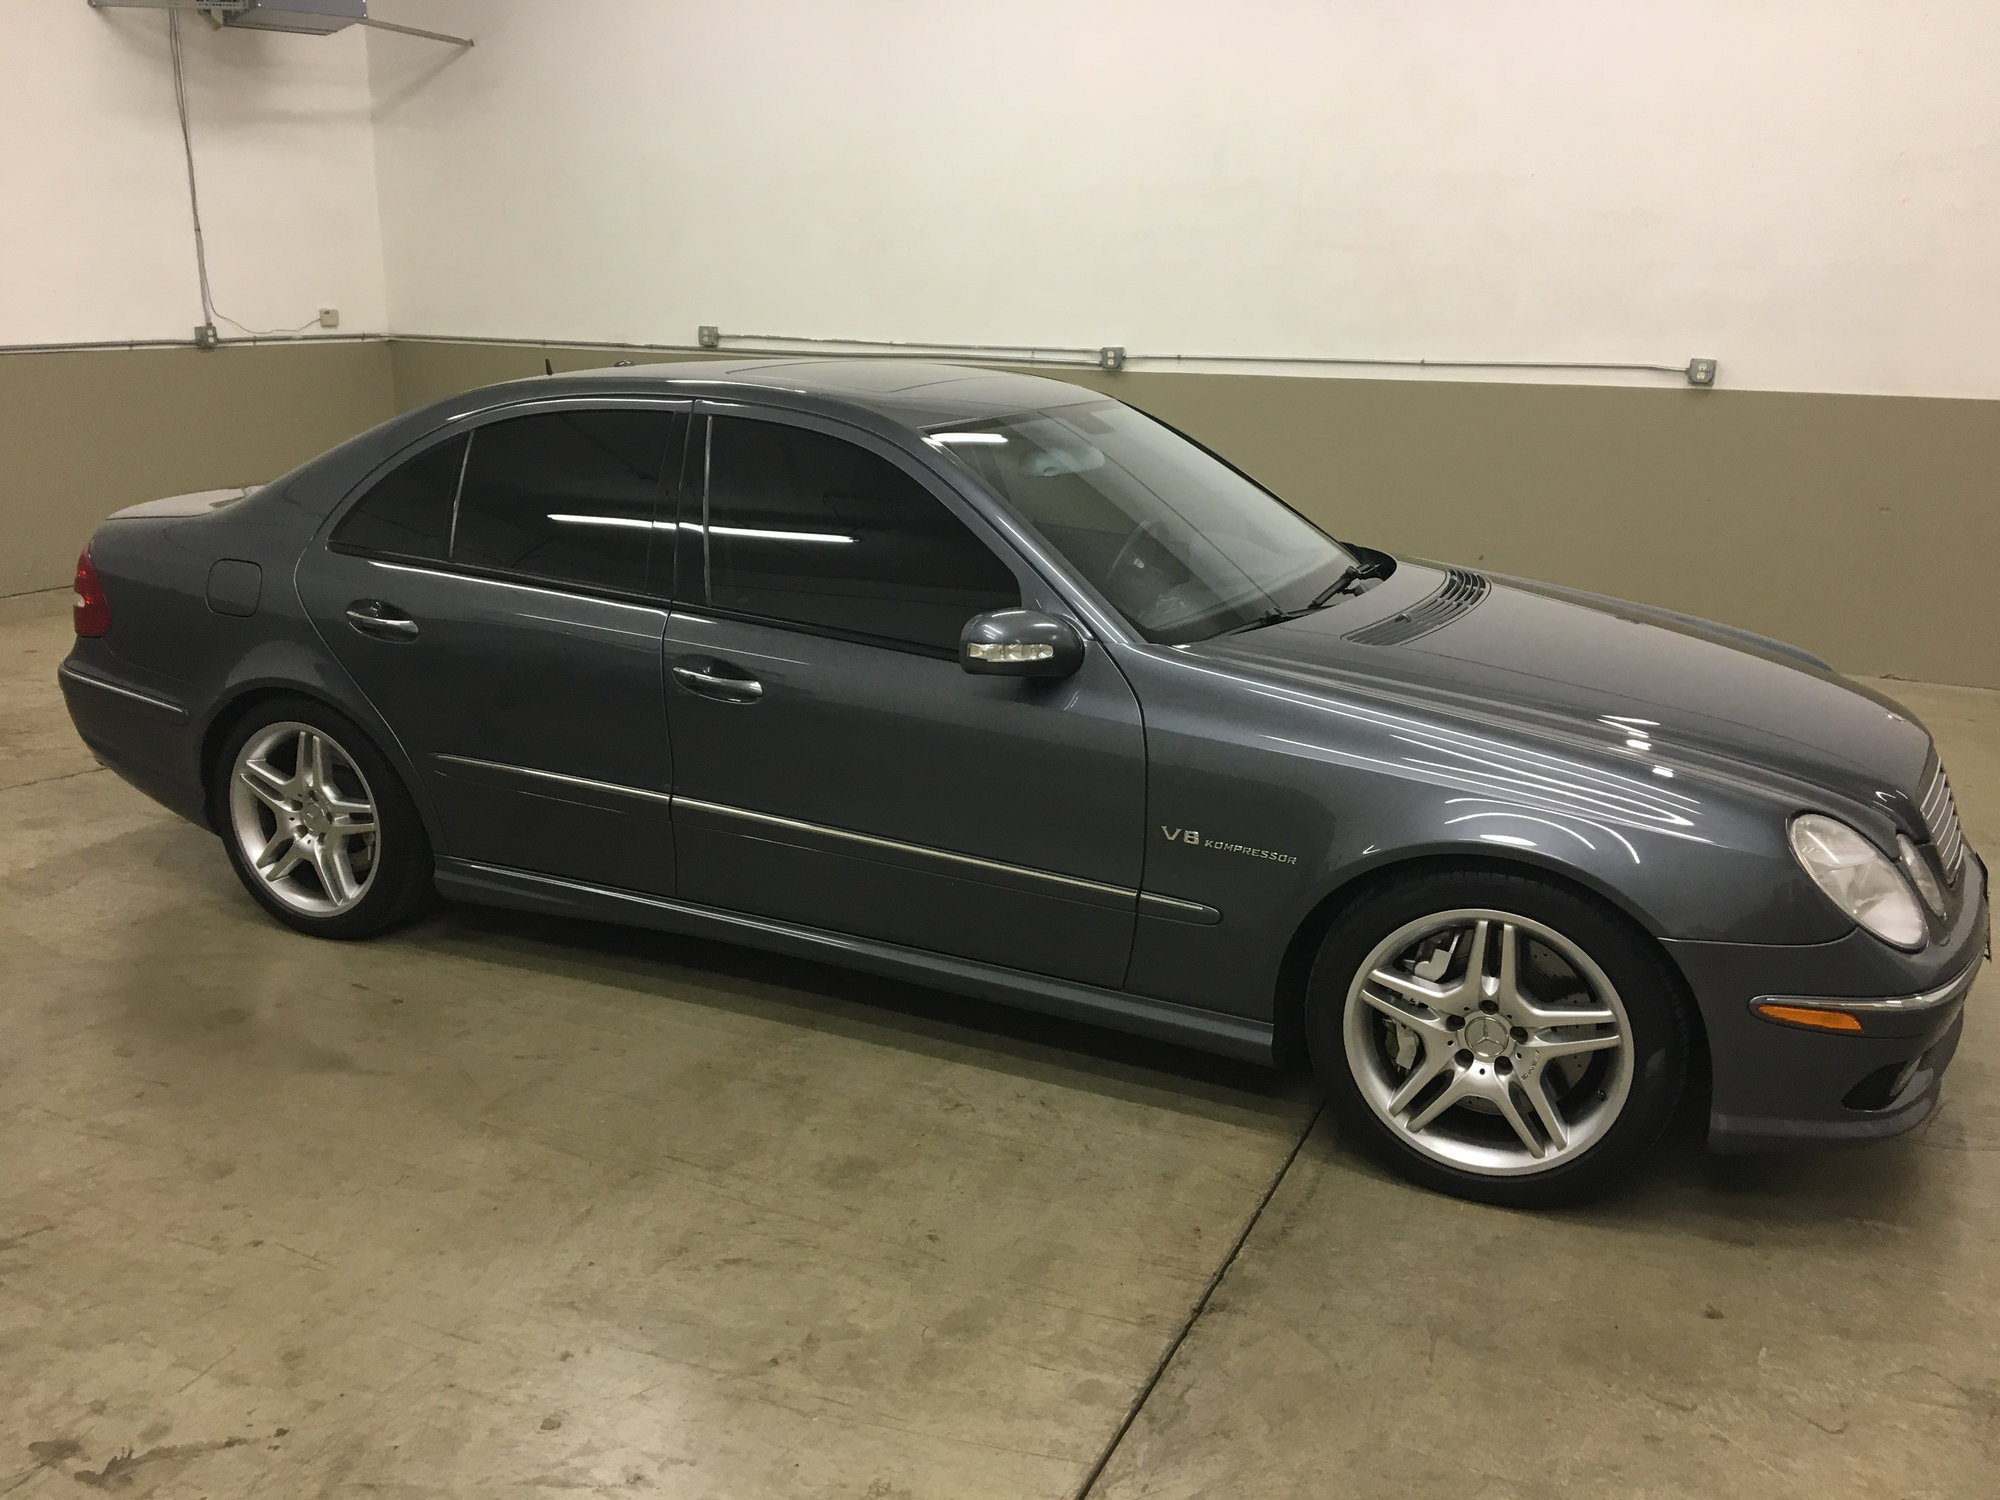 2006 Mercedes-Benz E55 AMG - 2006 E55 AMG in Immaculate Condition and only 74k Miles - Second Owner - Used - VIN WDBUF76J76A911291 - 74,500 Miles - 8 cyl - 2WD - Automatic - Sedan - Gray - Eugene, OR 97402, United States